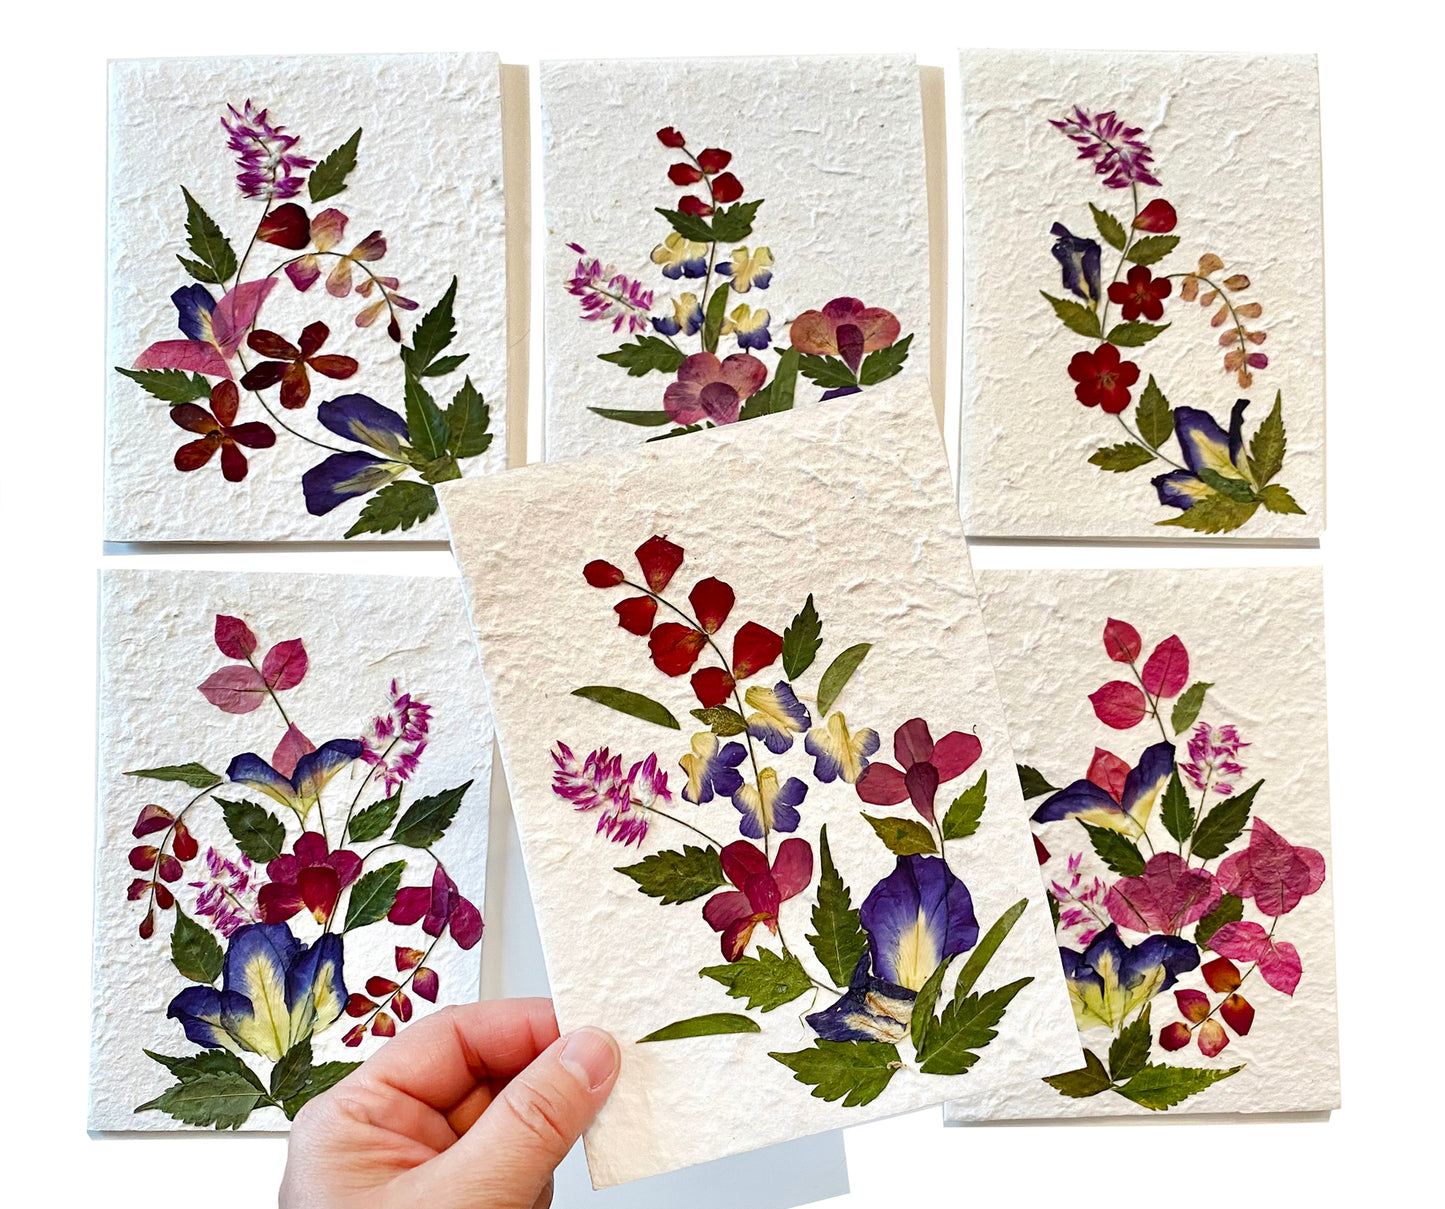 Handmade Cards 5x7 inch Real Dried Flowers Random Pack (3 Butterfly BLUE PEA)